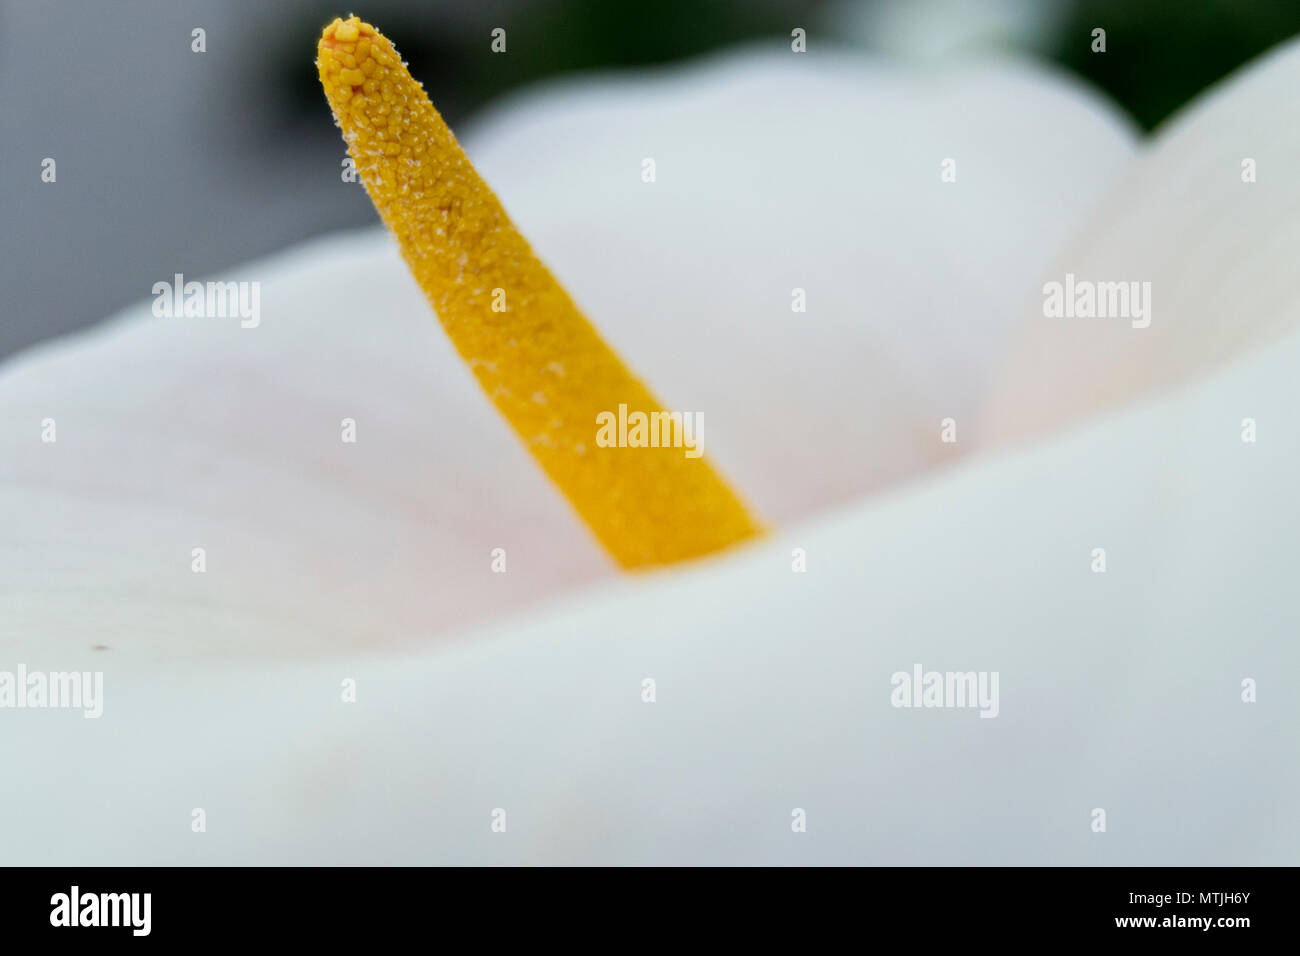 soft focus of white Zantedeschia aethiopica (known as calla lily and arum lily) with yellow spathe - Araceae, Alismatales Stock Photo